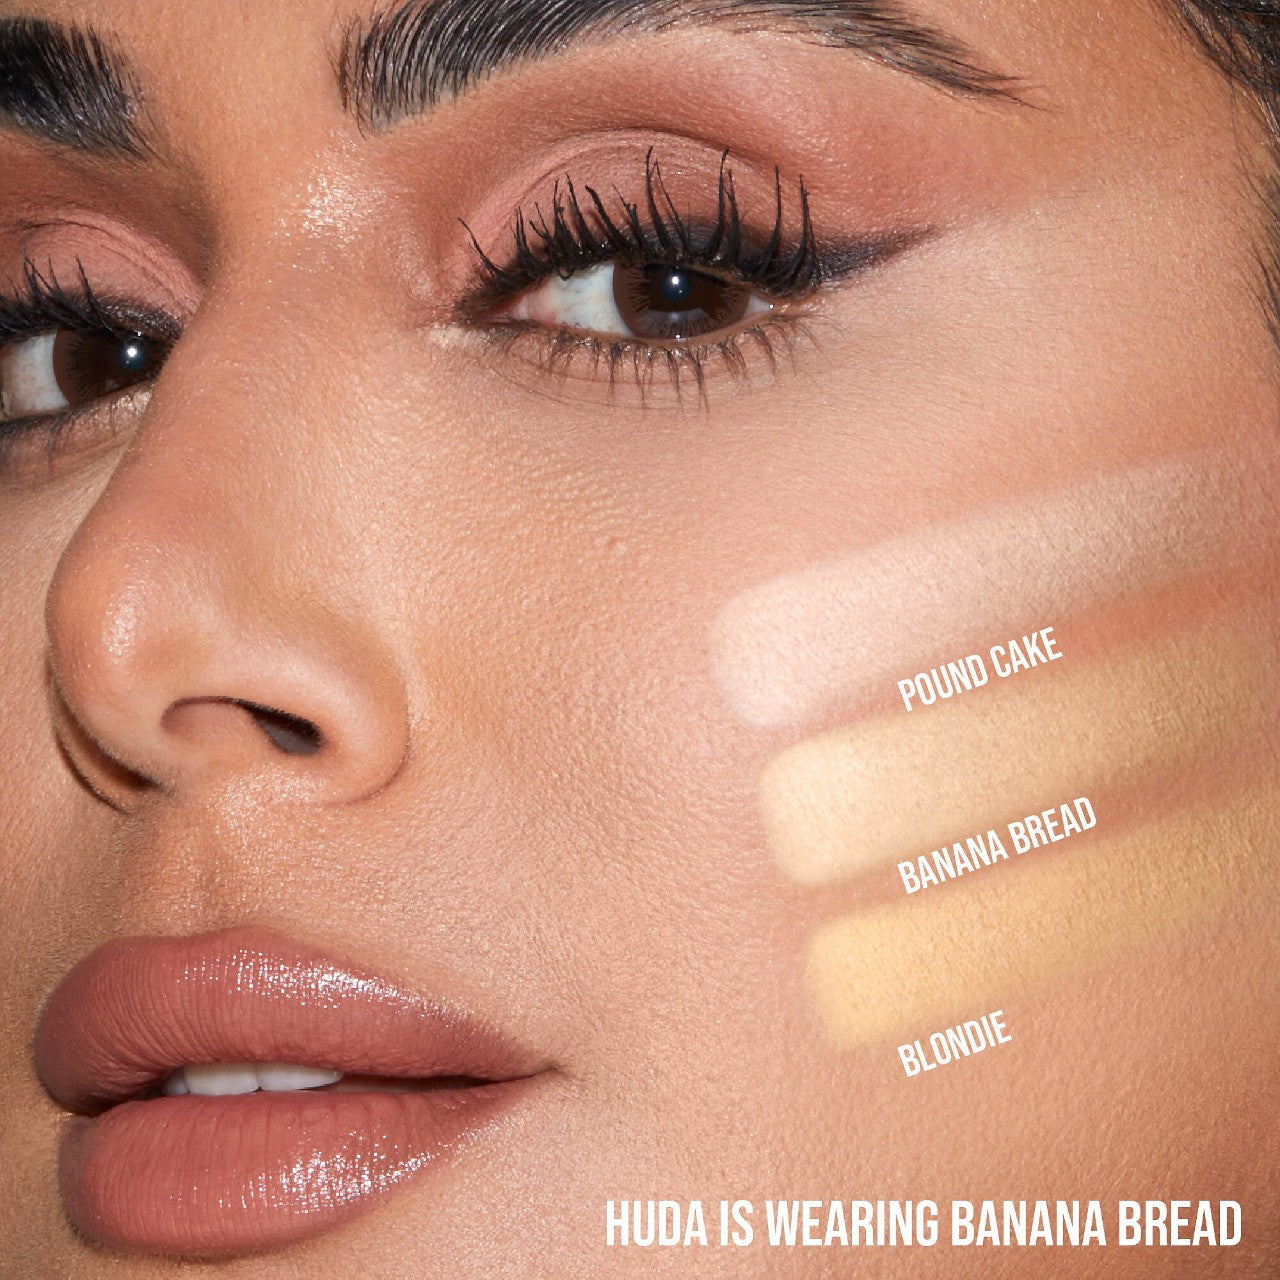 huda-beauty-easy-bake-and-snatch-pressed-brightening-and-setting-powder-banana-bread